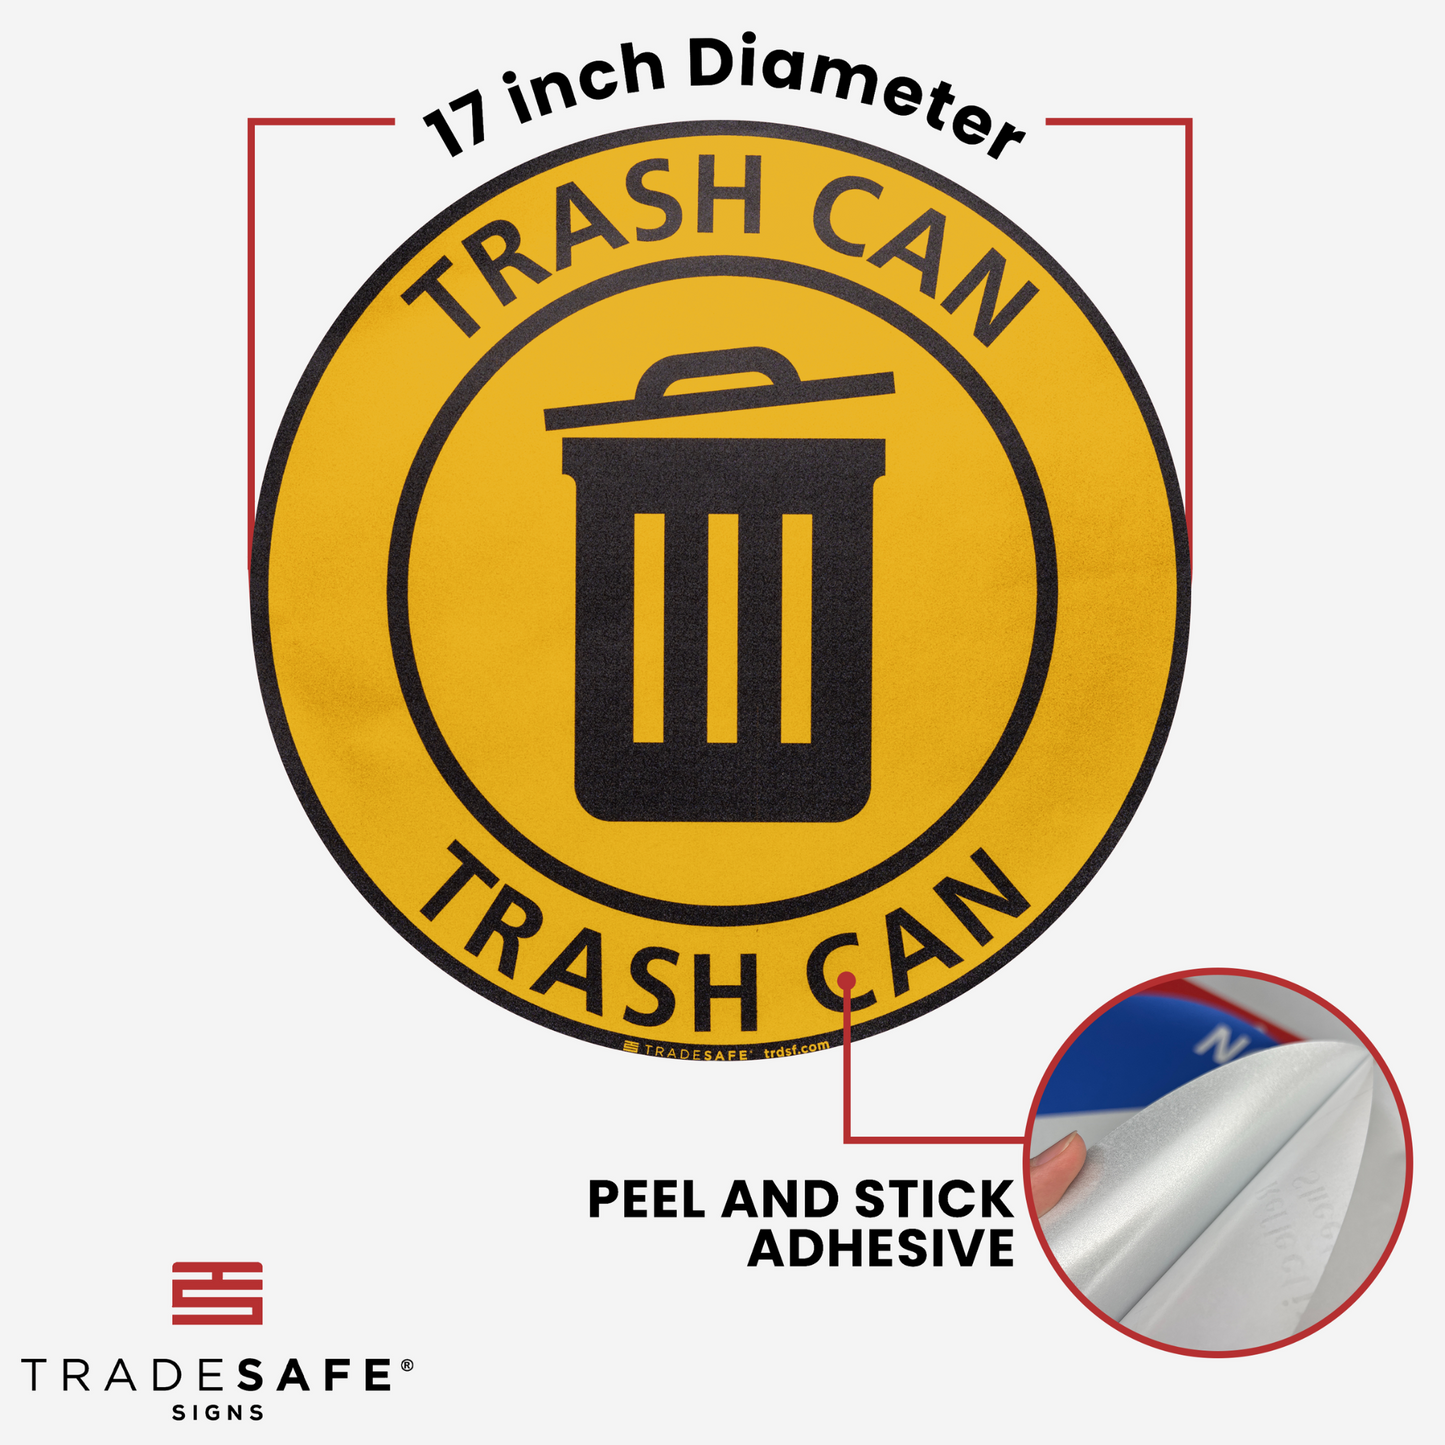 dimensions of trash can sign